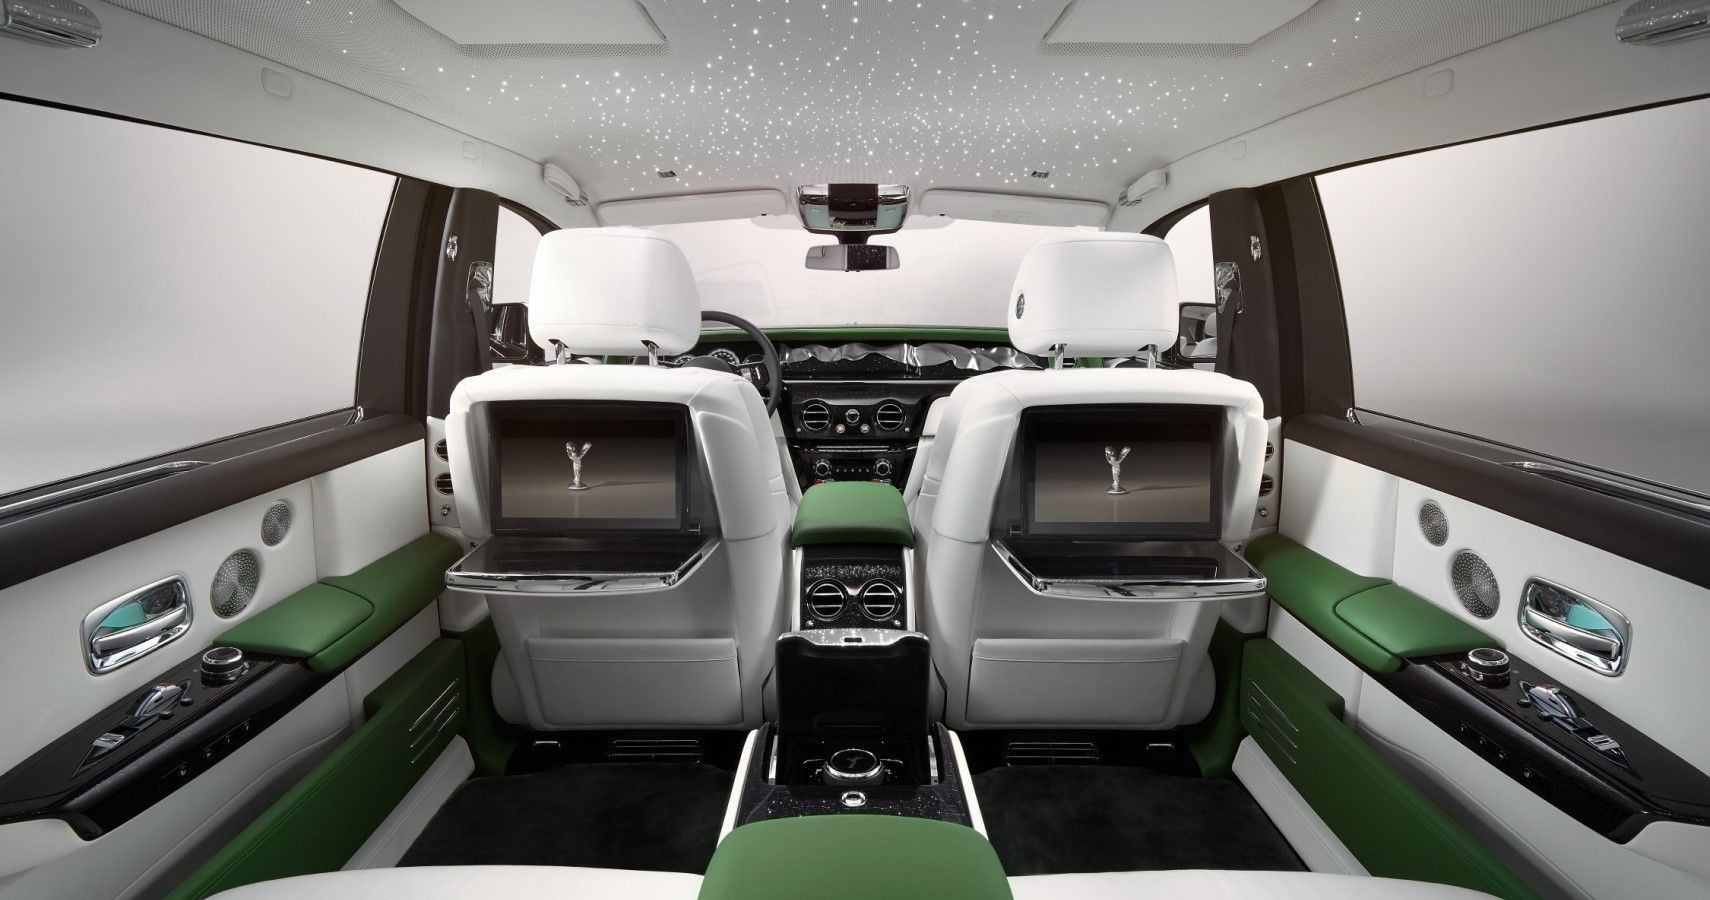 The Interior Of The 2023 Rolls-Royce Phantom Is Truly Breathtaking